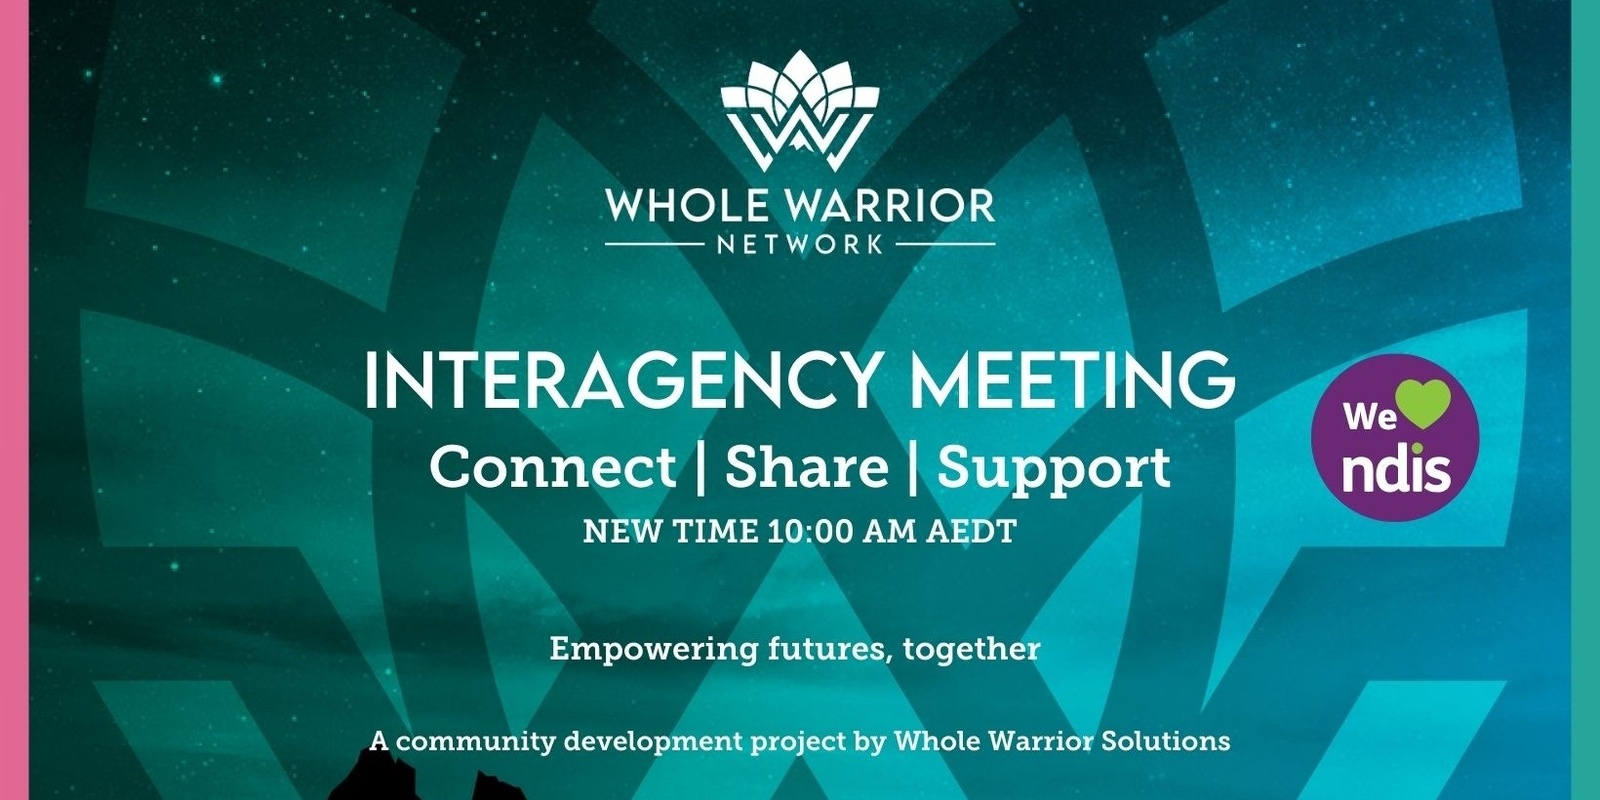 Banner image for Interagency Meeting - online monthly disAbility networking - Whole Warrior Network